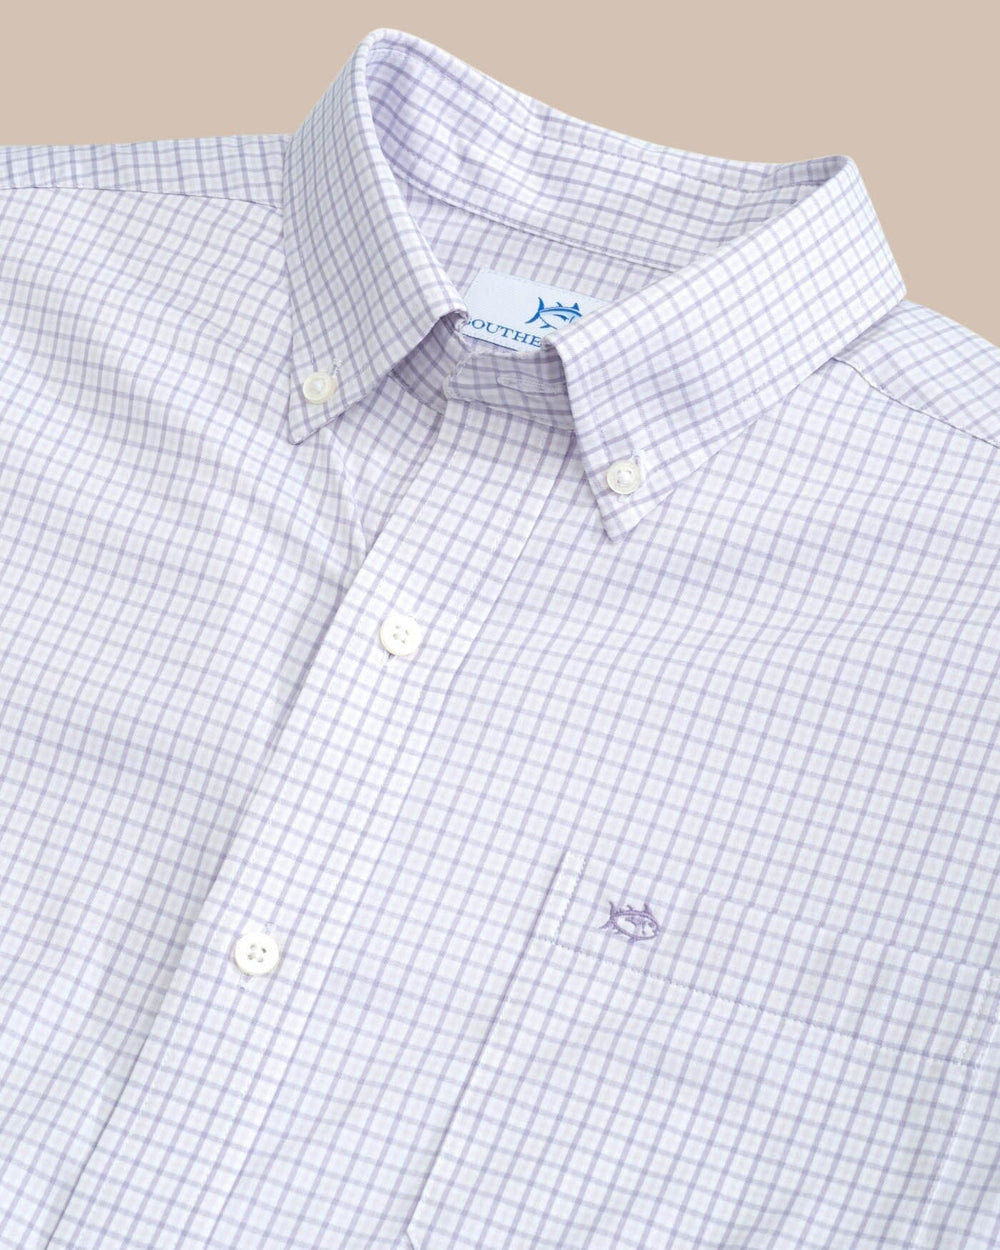 The detail view of the Southern Tide brrr Intercoastal McBee Check Long Sleeve Sportshirt by Southern Tide - Wisteria Purple